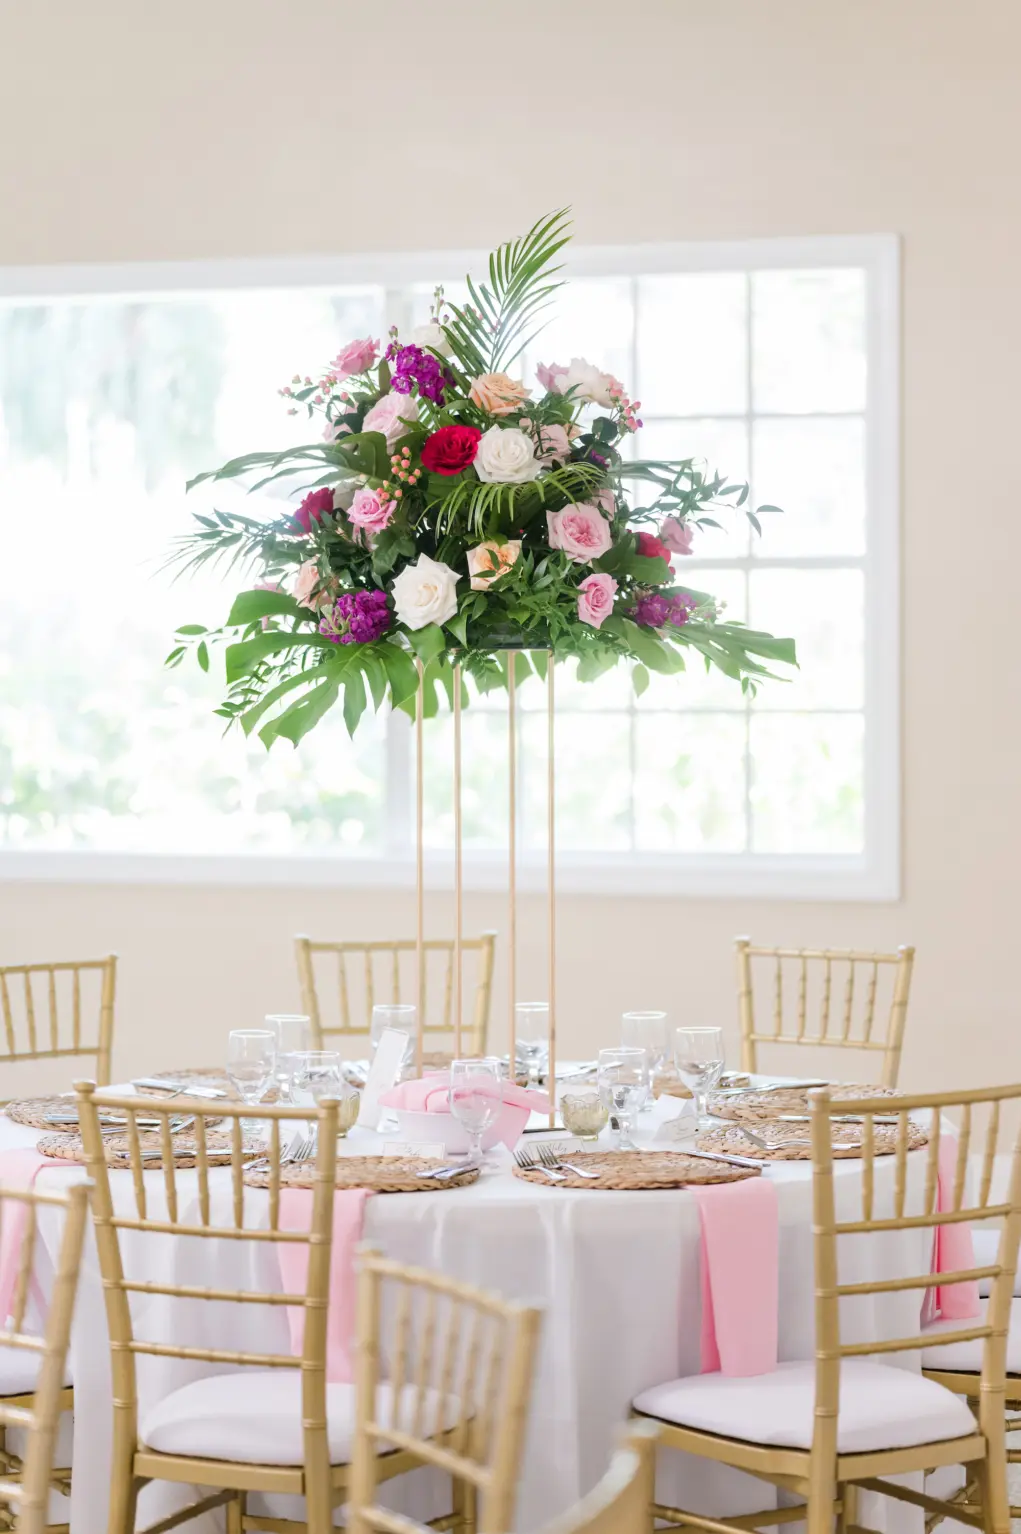 Elegant Tropical Tall Gold Stand with Greenery, Pink, Orange, White, and Purple Flowers | Vibrant Pink Garden Inspired Wedding Reception Centerpiece Ideas